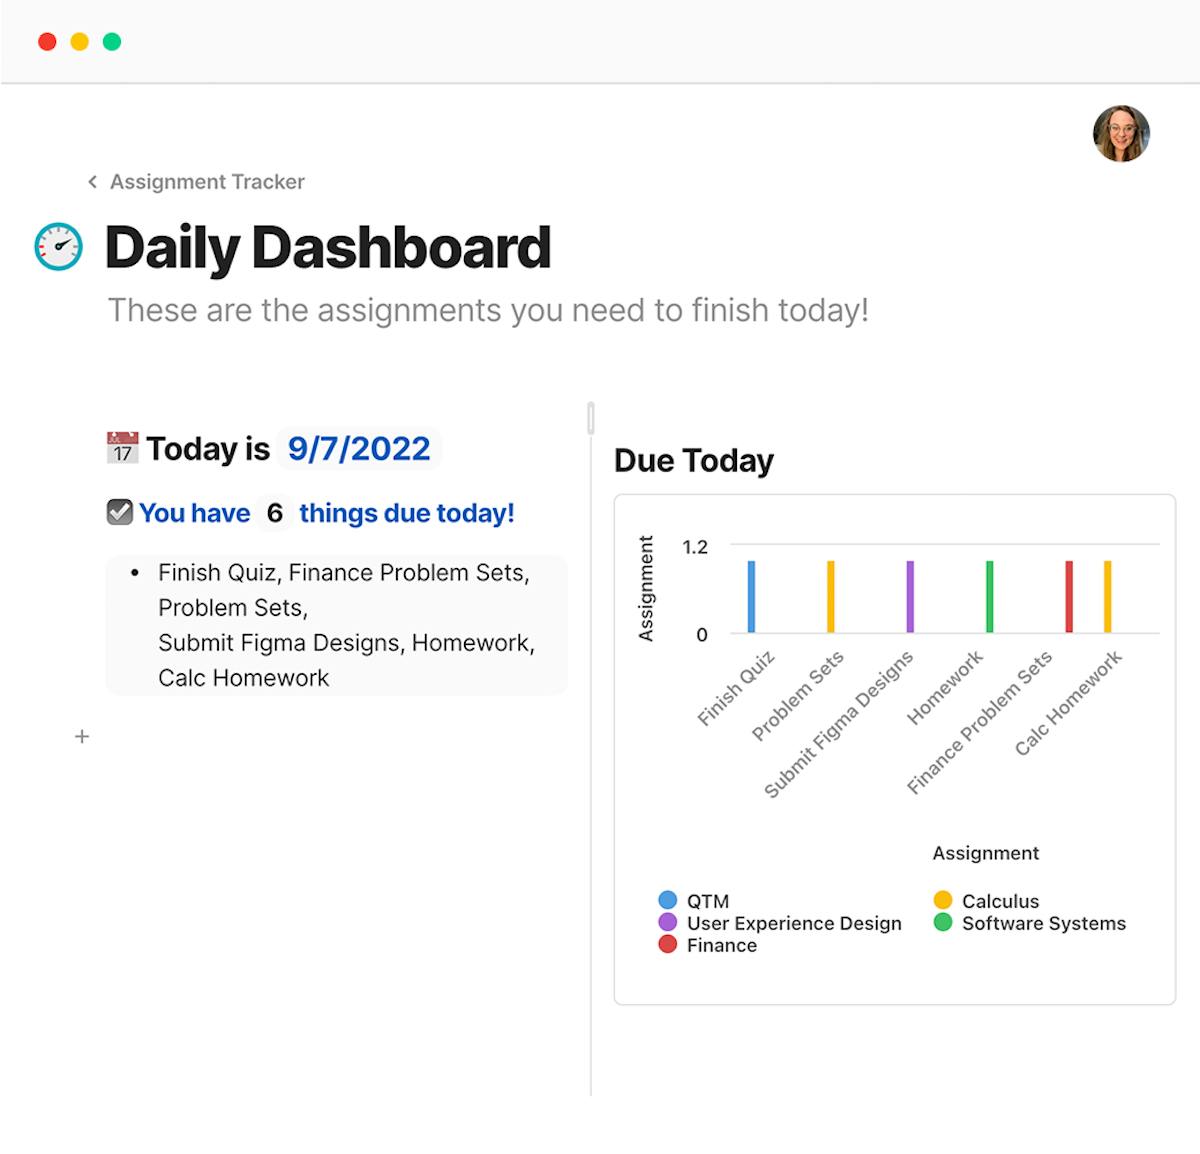 Daily assignment dashboard built in Coda - shows what is due today